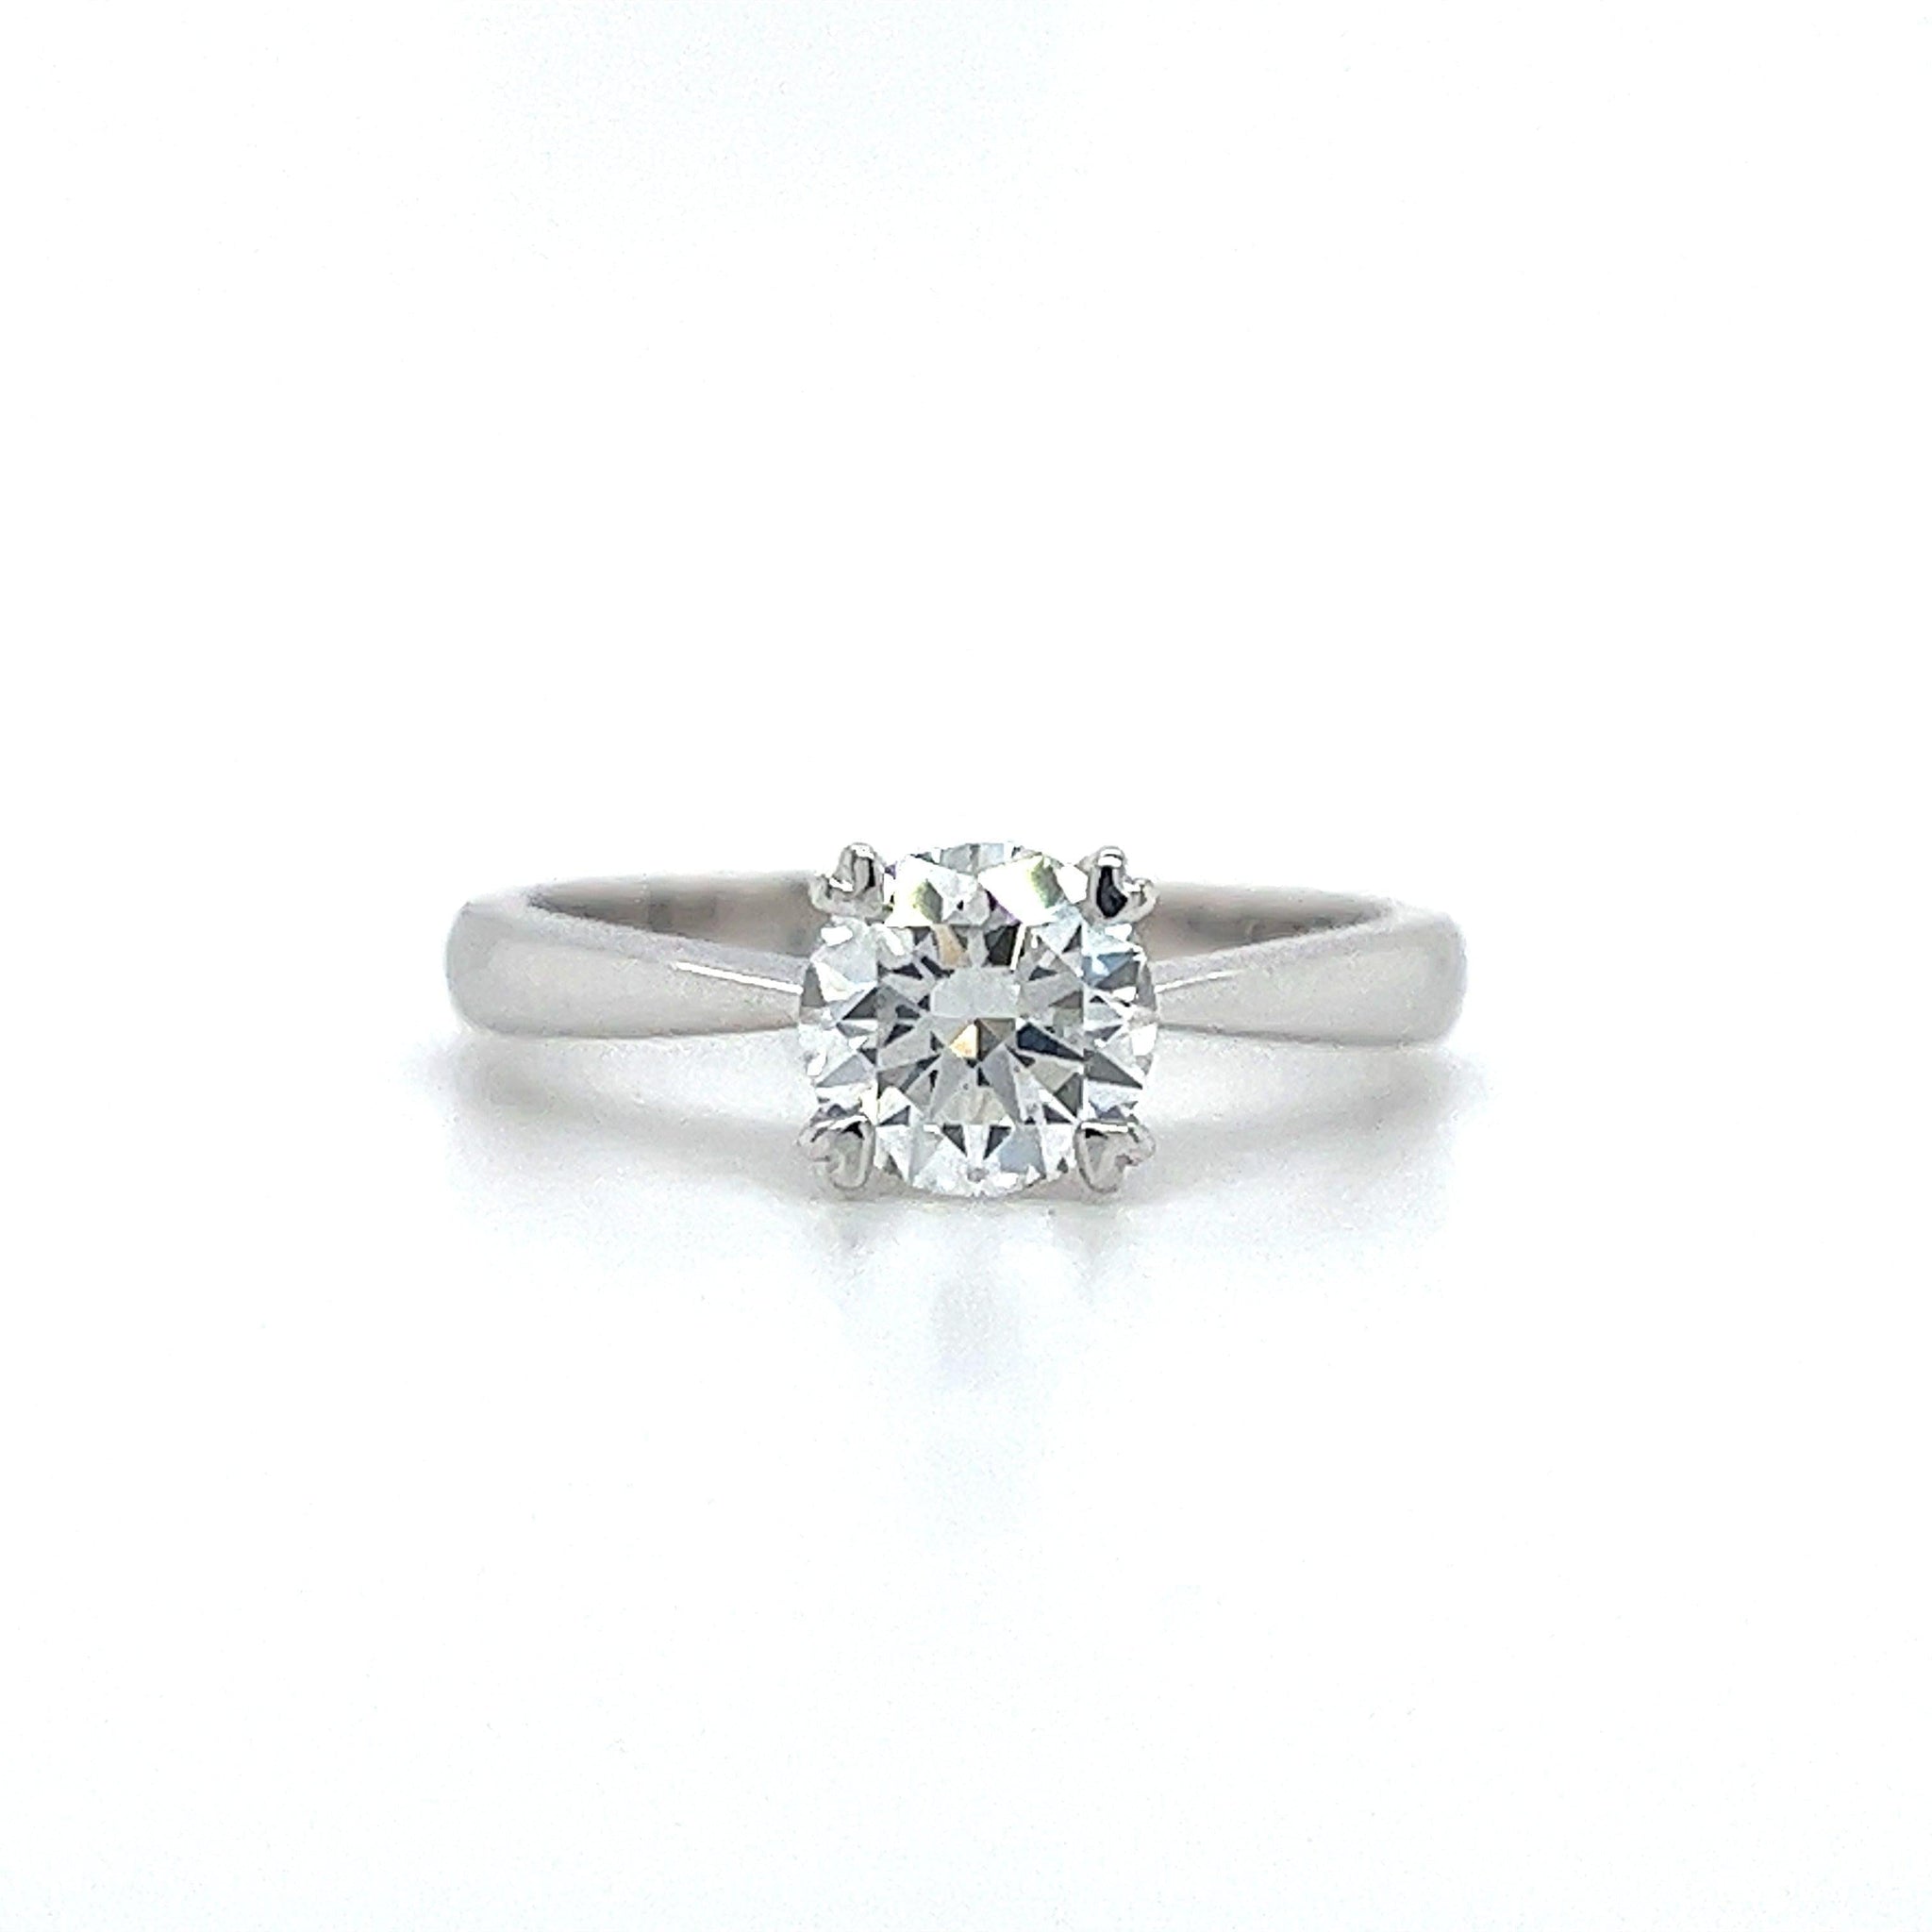 1.02 Carat E/VS1 Lab Grown Diamond With Solitaire Engagement Ring